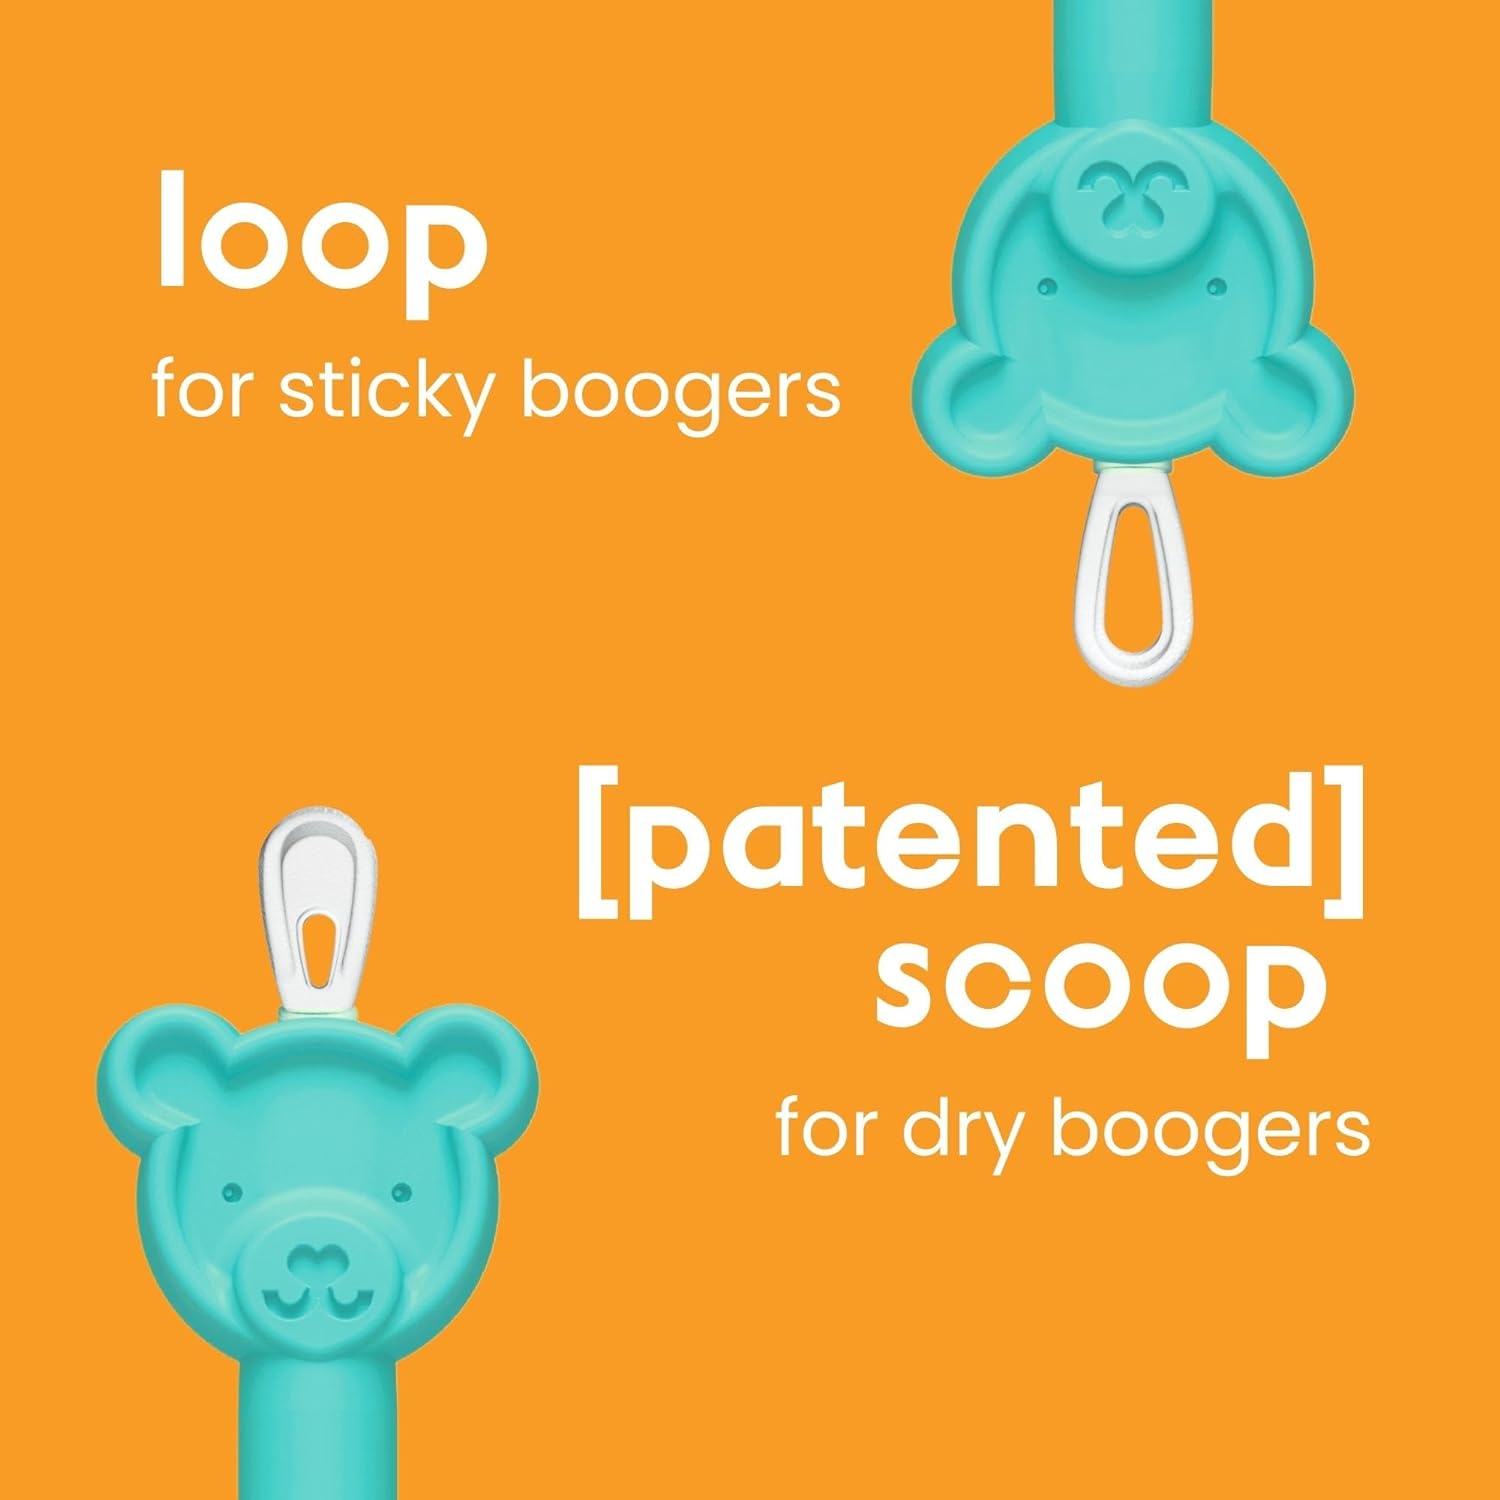 Oogiebear Baby Nasal Aspirator Bulb and 2-in-1 Nose Booger Snot